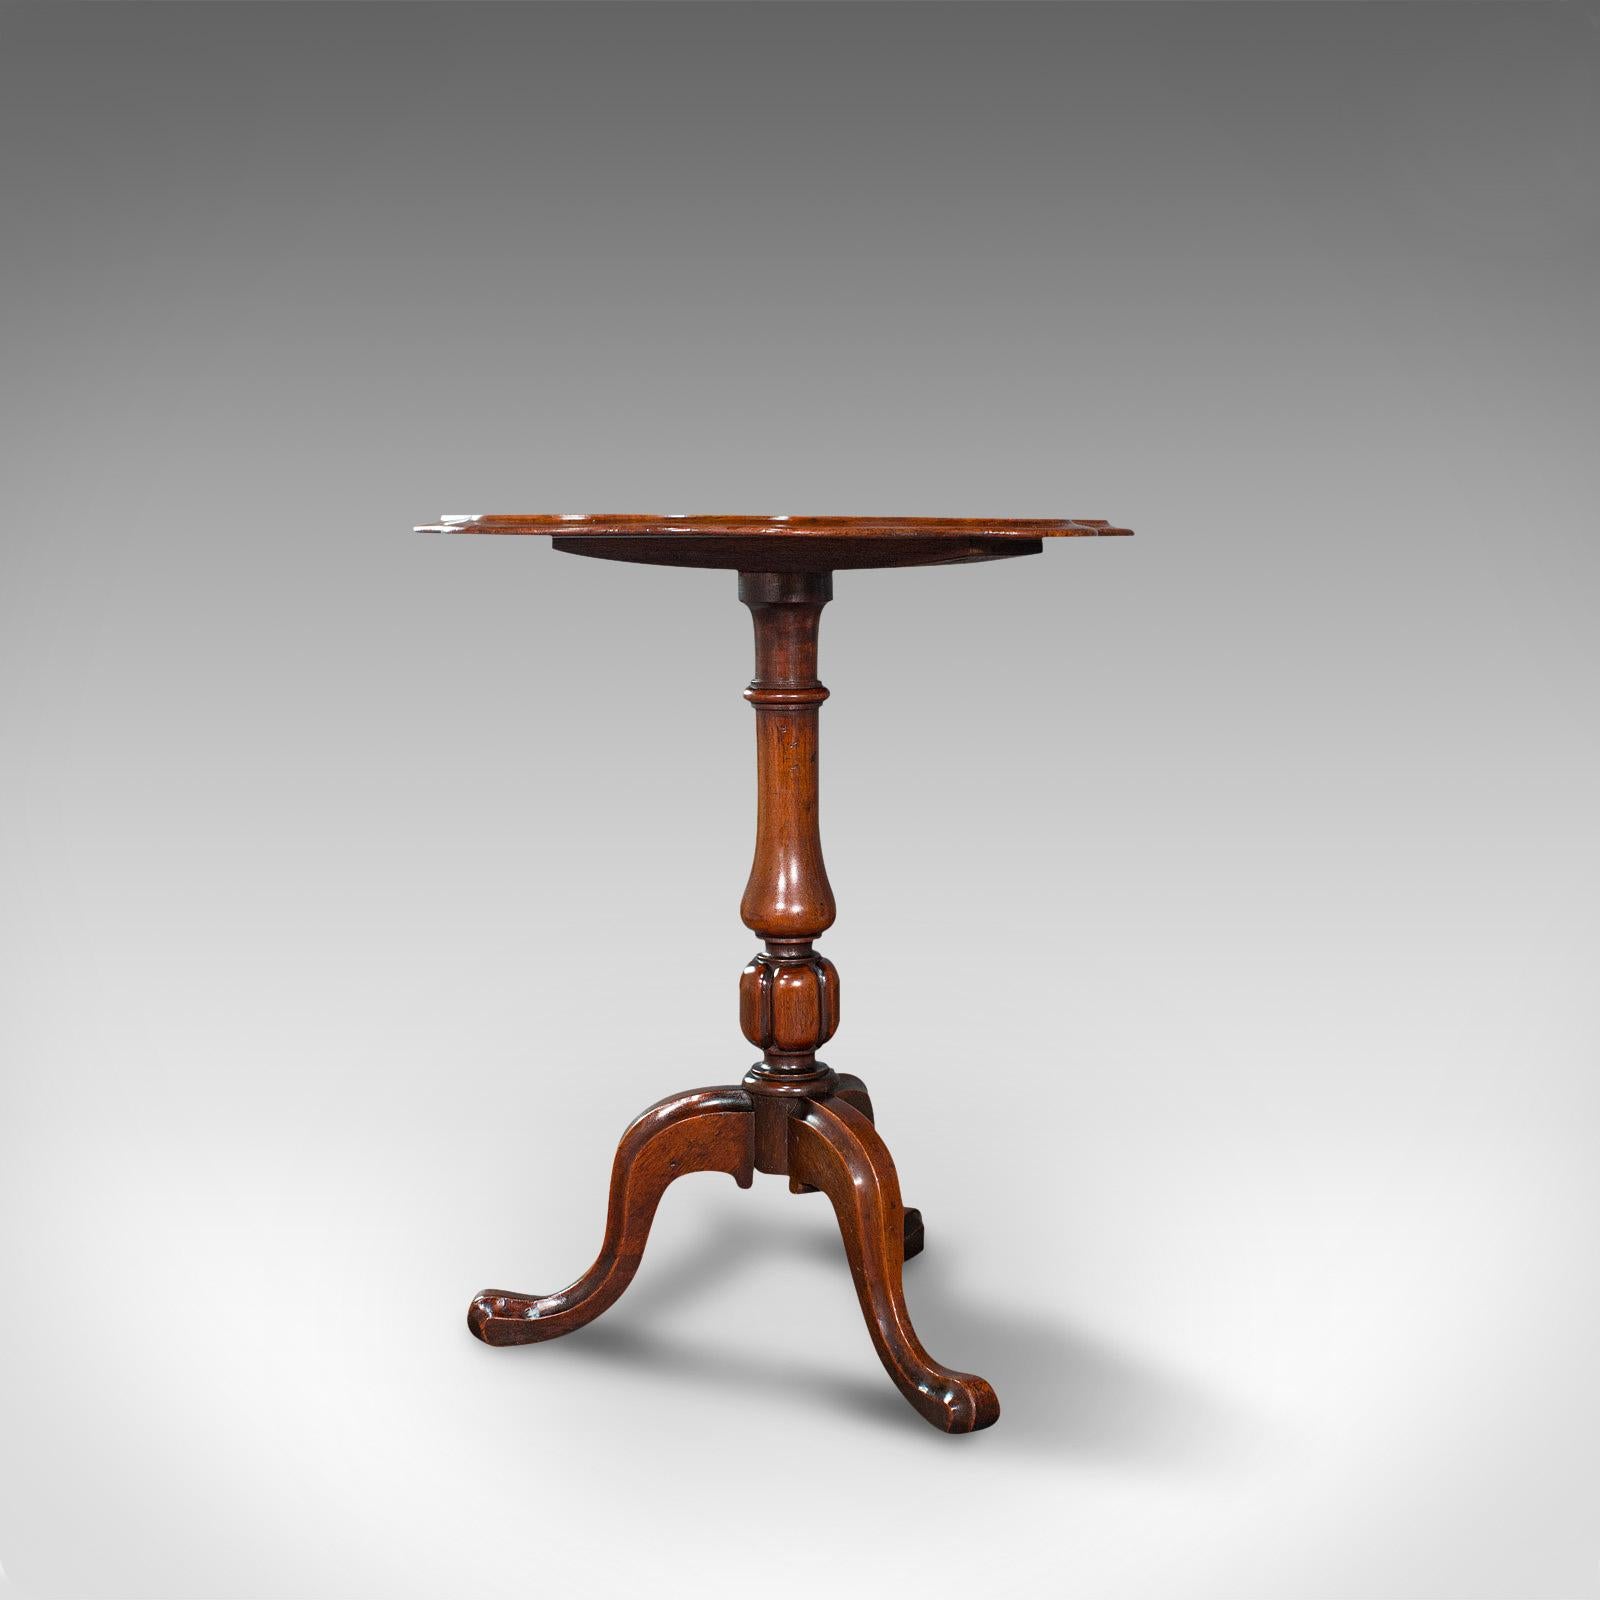 This is a superb antique wine table. An English, mahogany and burr walnut inlaid side table exuding superb marquetry, dating to the Regency period, circa 1820.

Dashing wine table with fine figuring and superior craftsmanship
Displays a desirable